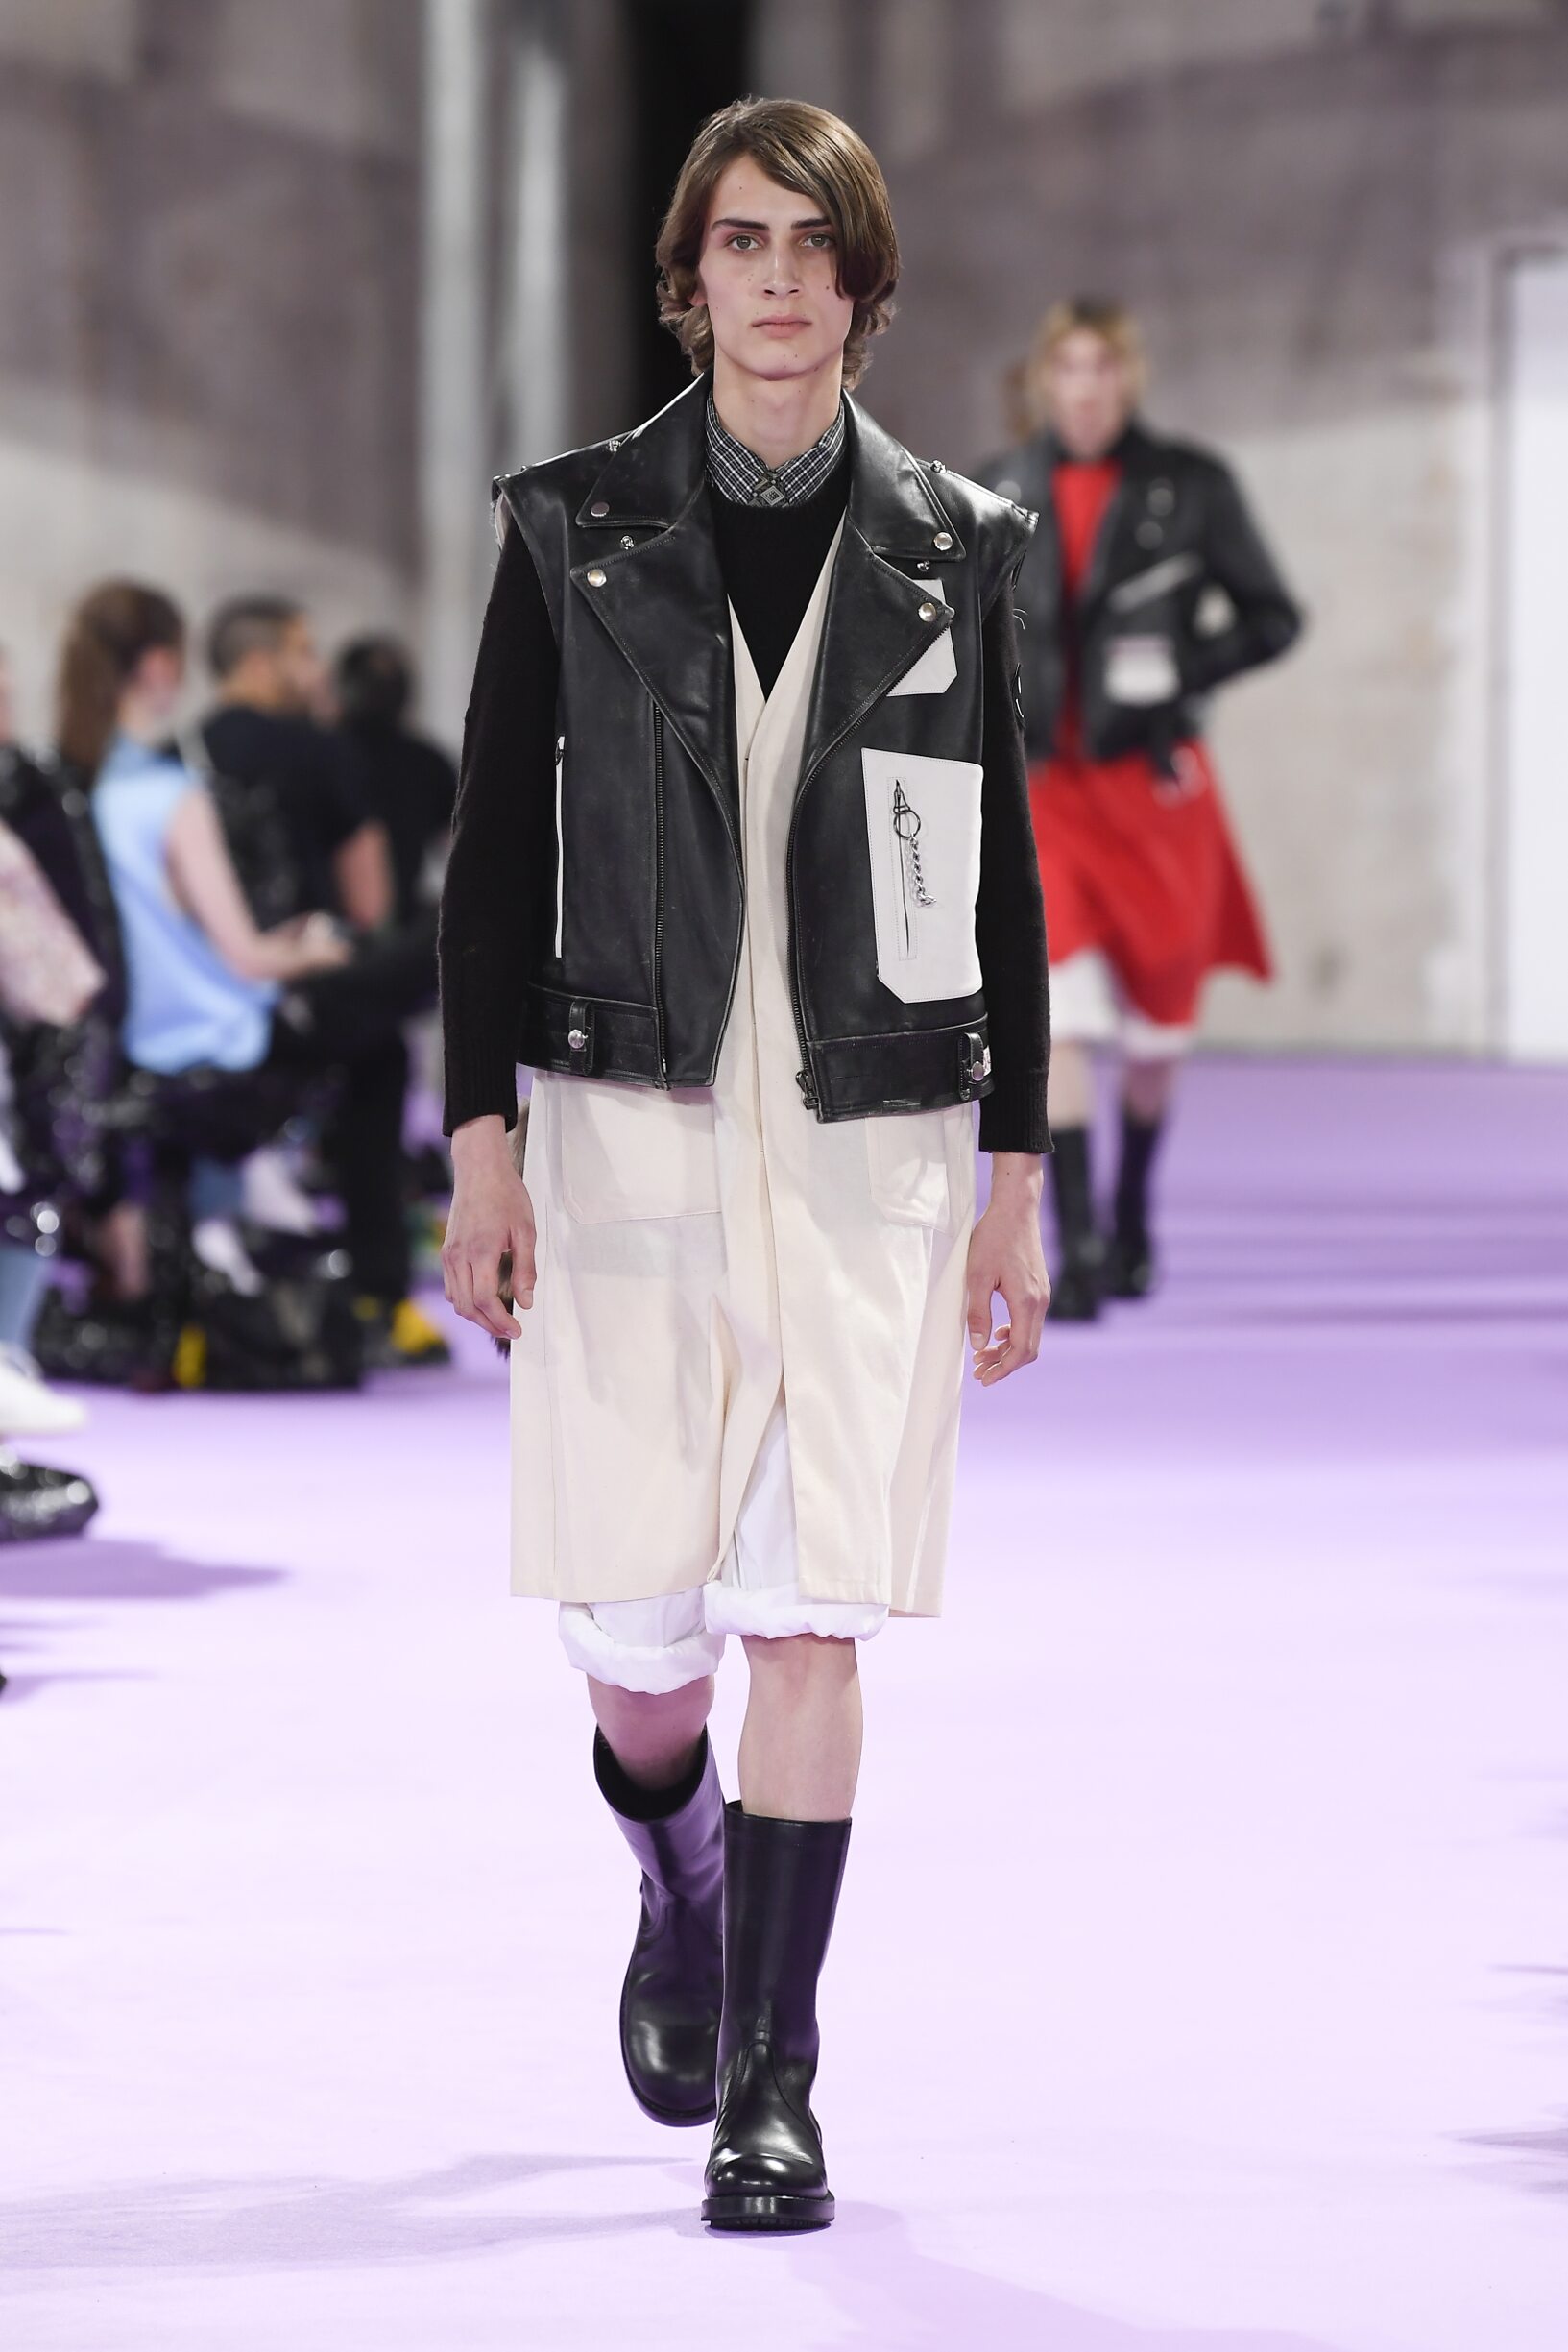 RAF SIMONS SPRING SUMMER 2020 MEN’S COLLECTION | The Skinny Beep